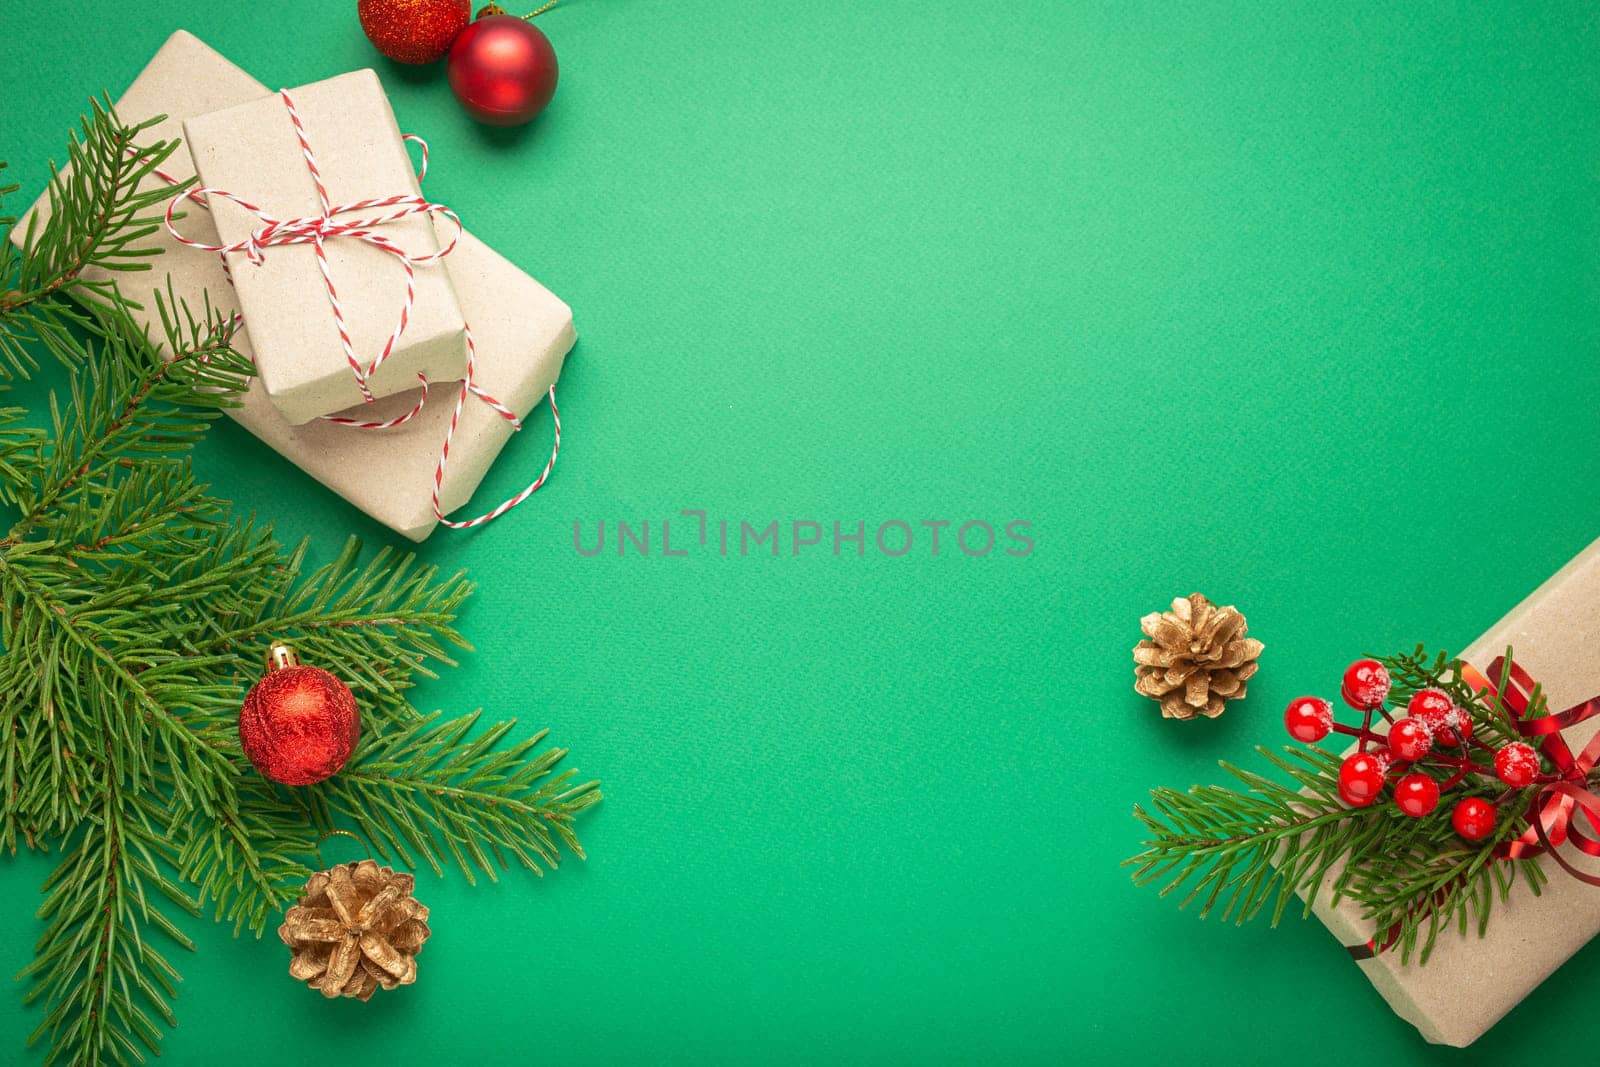 Christmas or New Year celebration green paper festive background with decoration fir tree, present boxes, cones, berries, sparkly red balls. Space for text. by its_al_dente